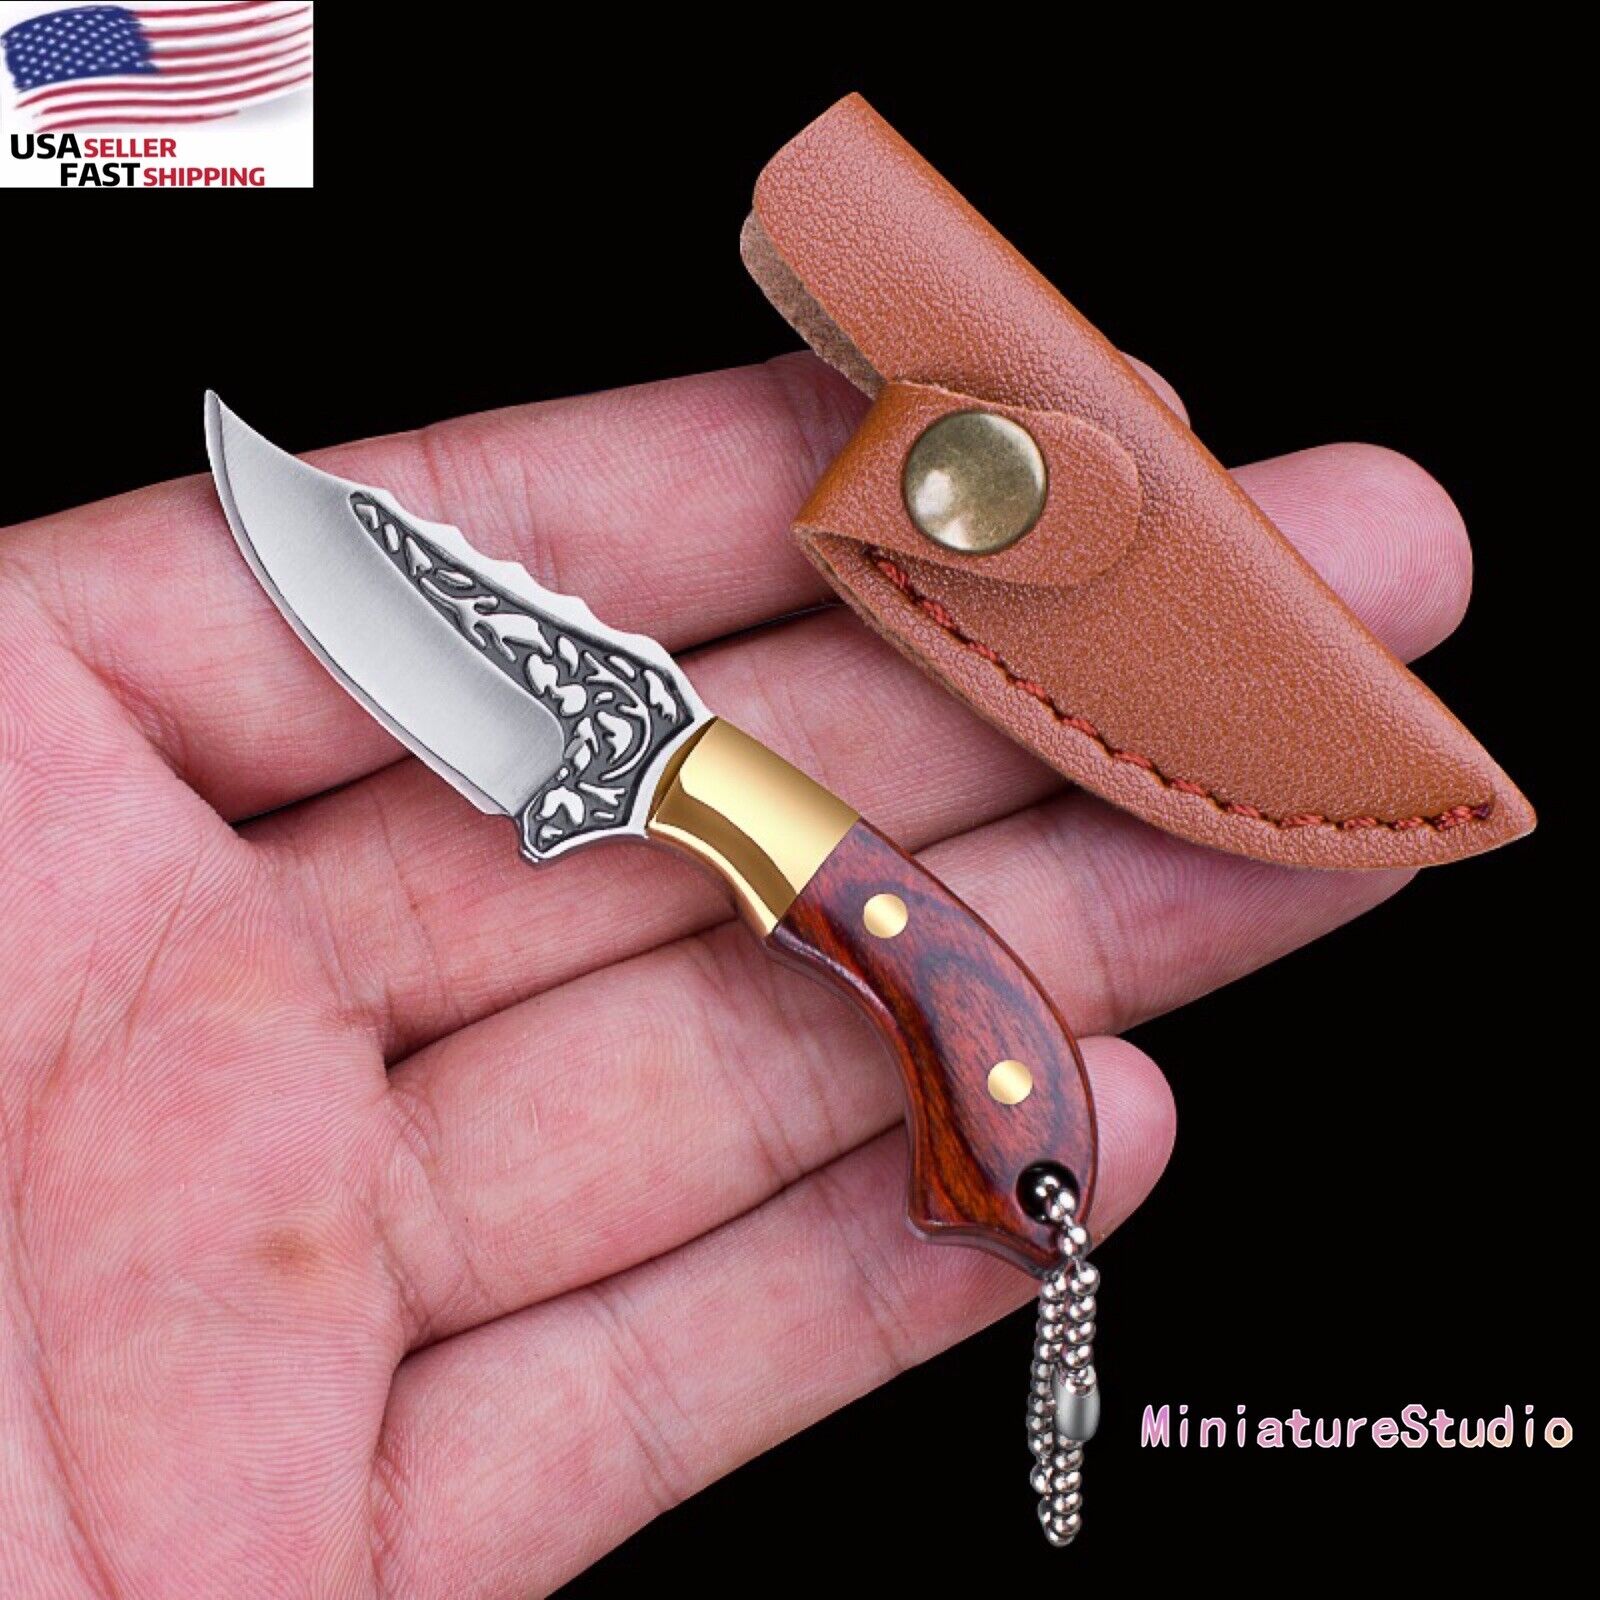 EDC Real Miniature Tiny Working Pocket Stainless Steel Knife Wooden Handle GIFT